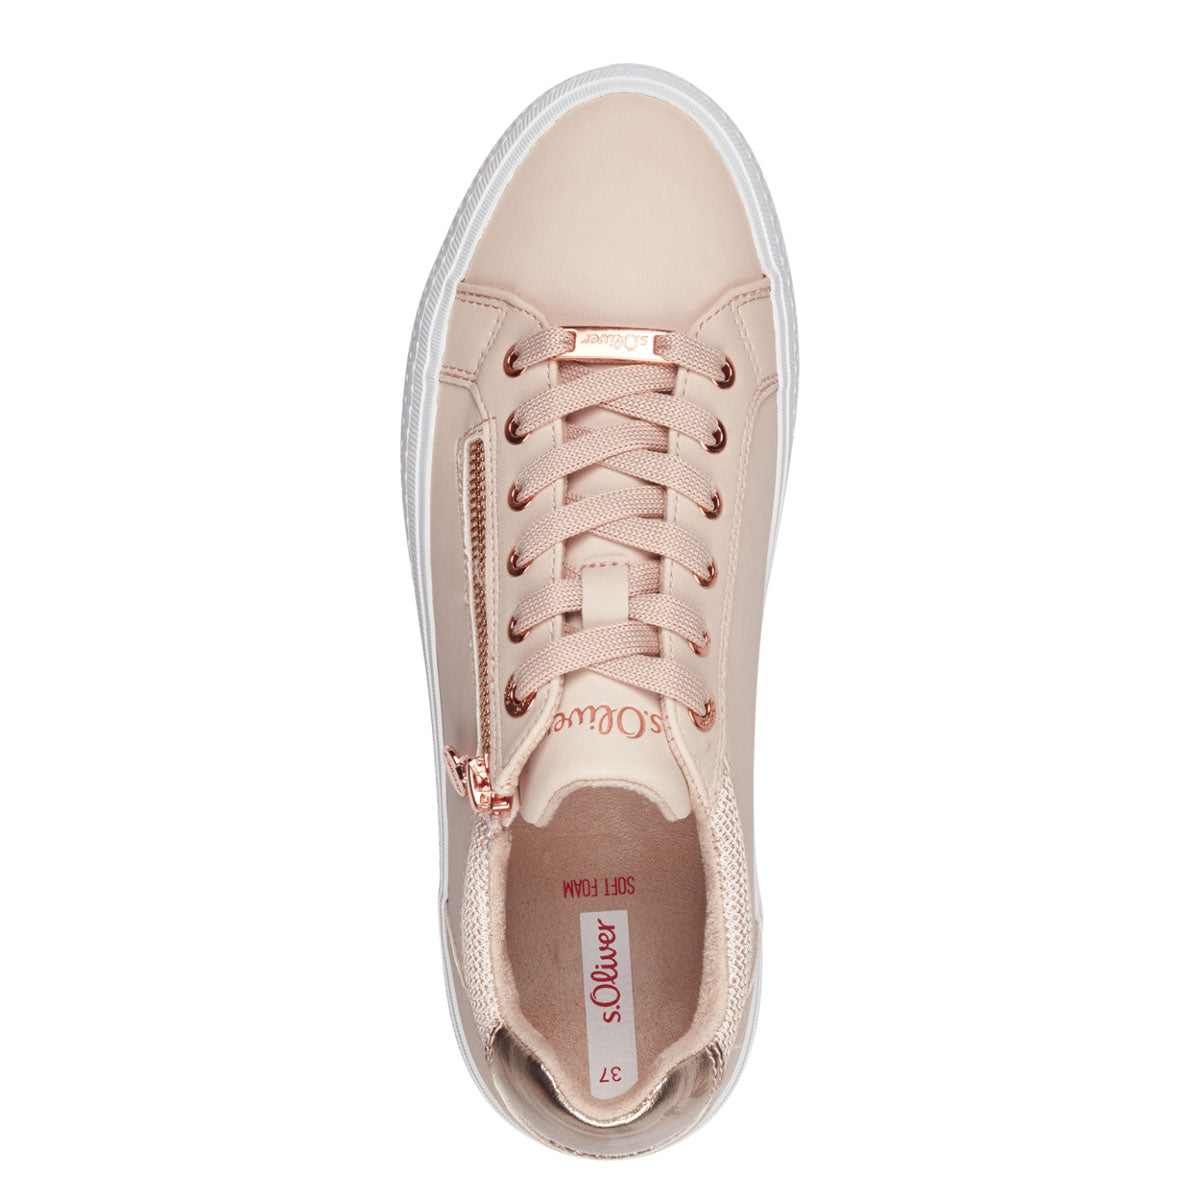 Top view capturing the runner's round toe and rose-coloured laces.